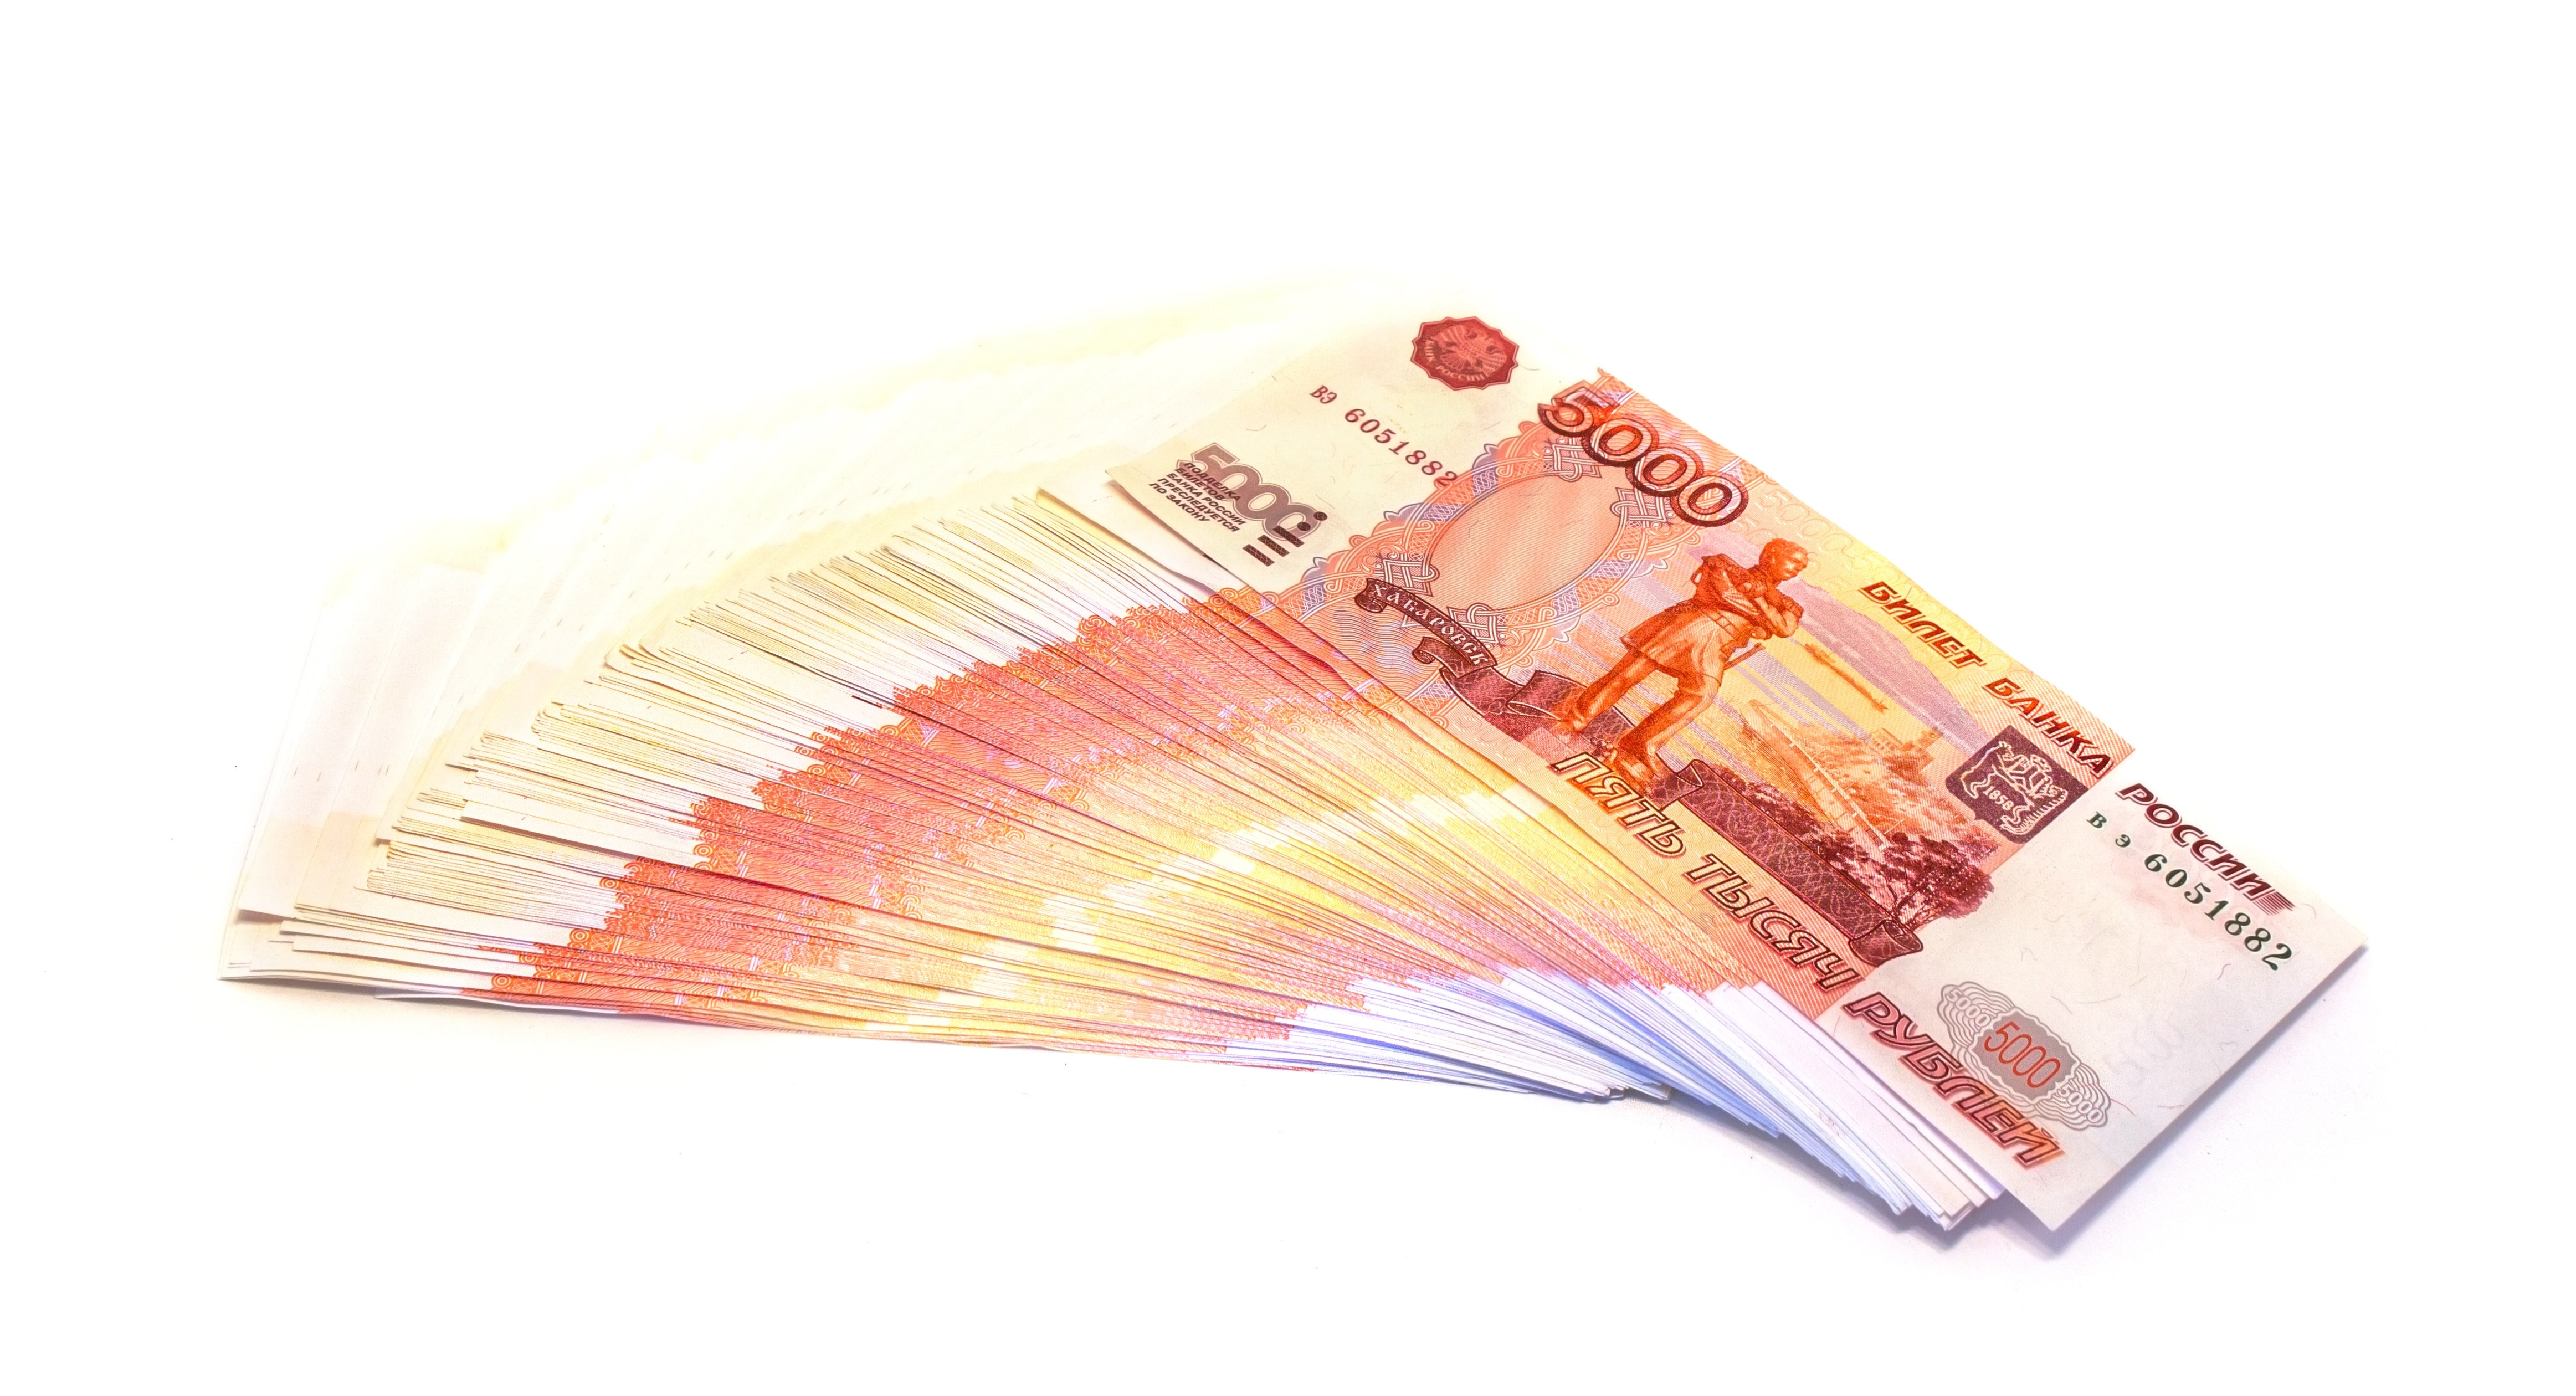 Money, Bills, Ruble, Million Rubles, wealth, paper currency free